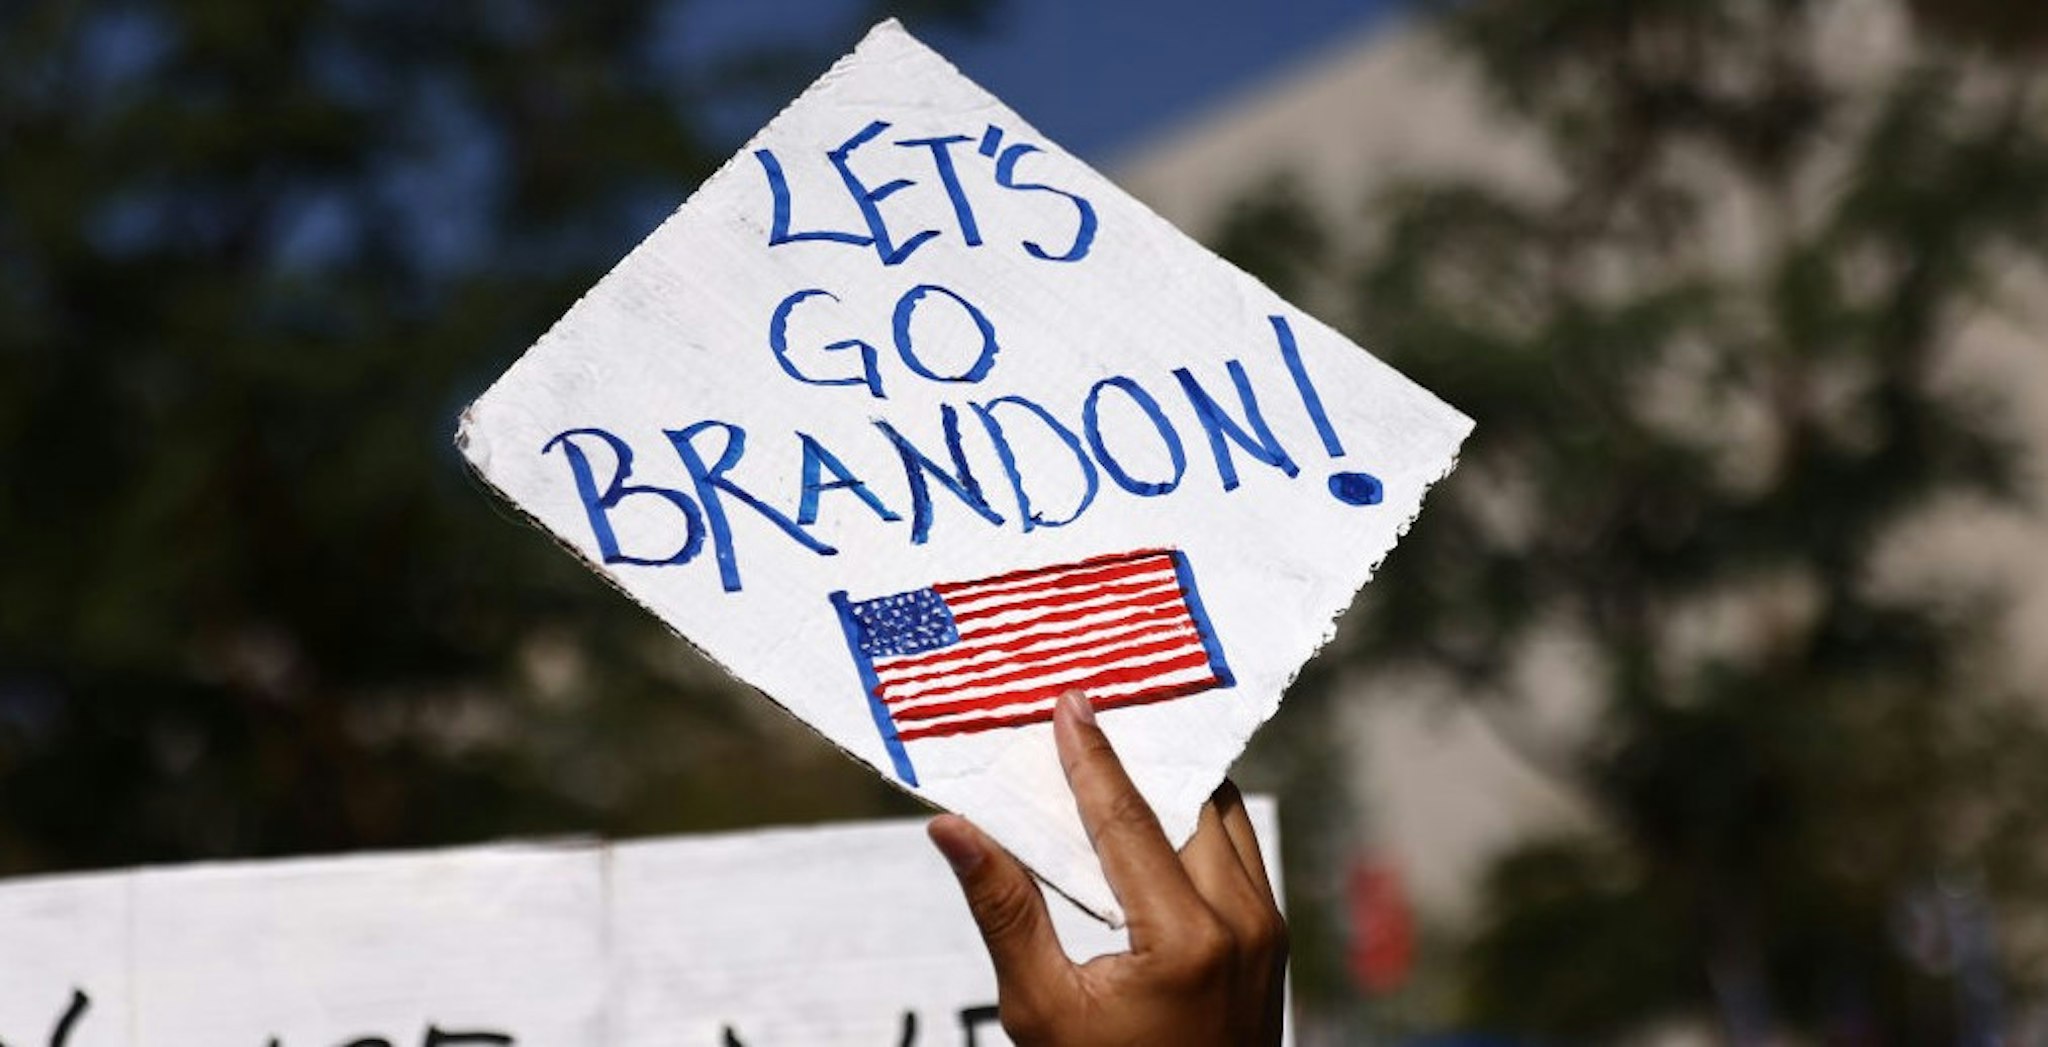 American Airlines apologizes about pilot with 'Let's Go Brandon' sticker